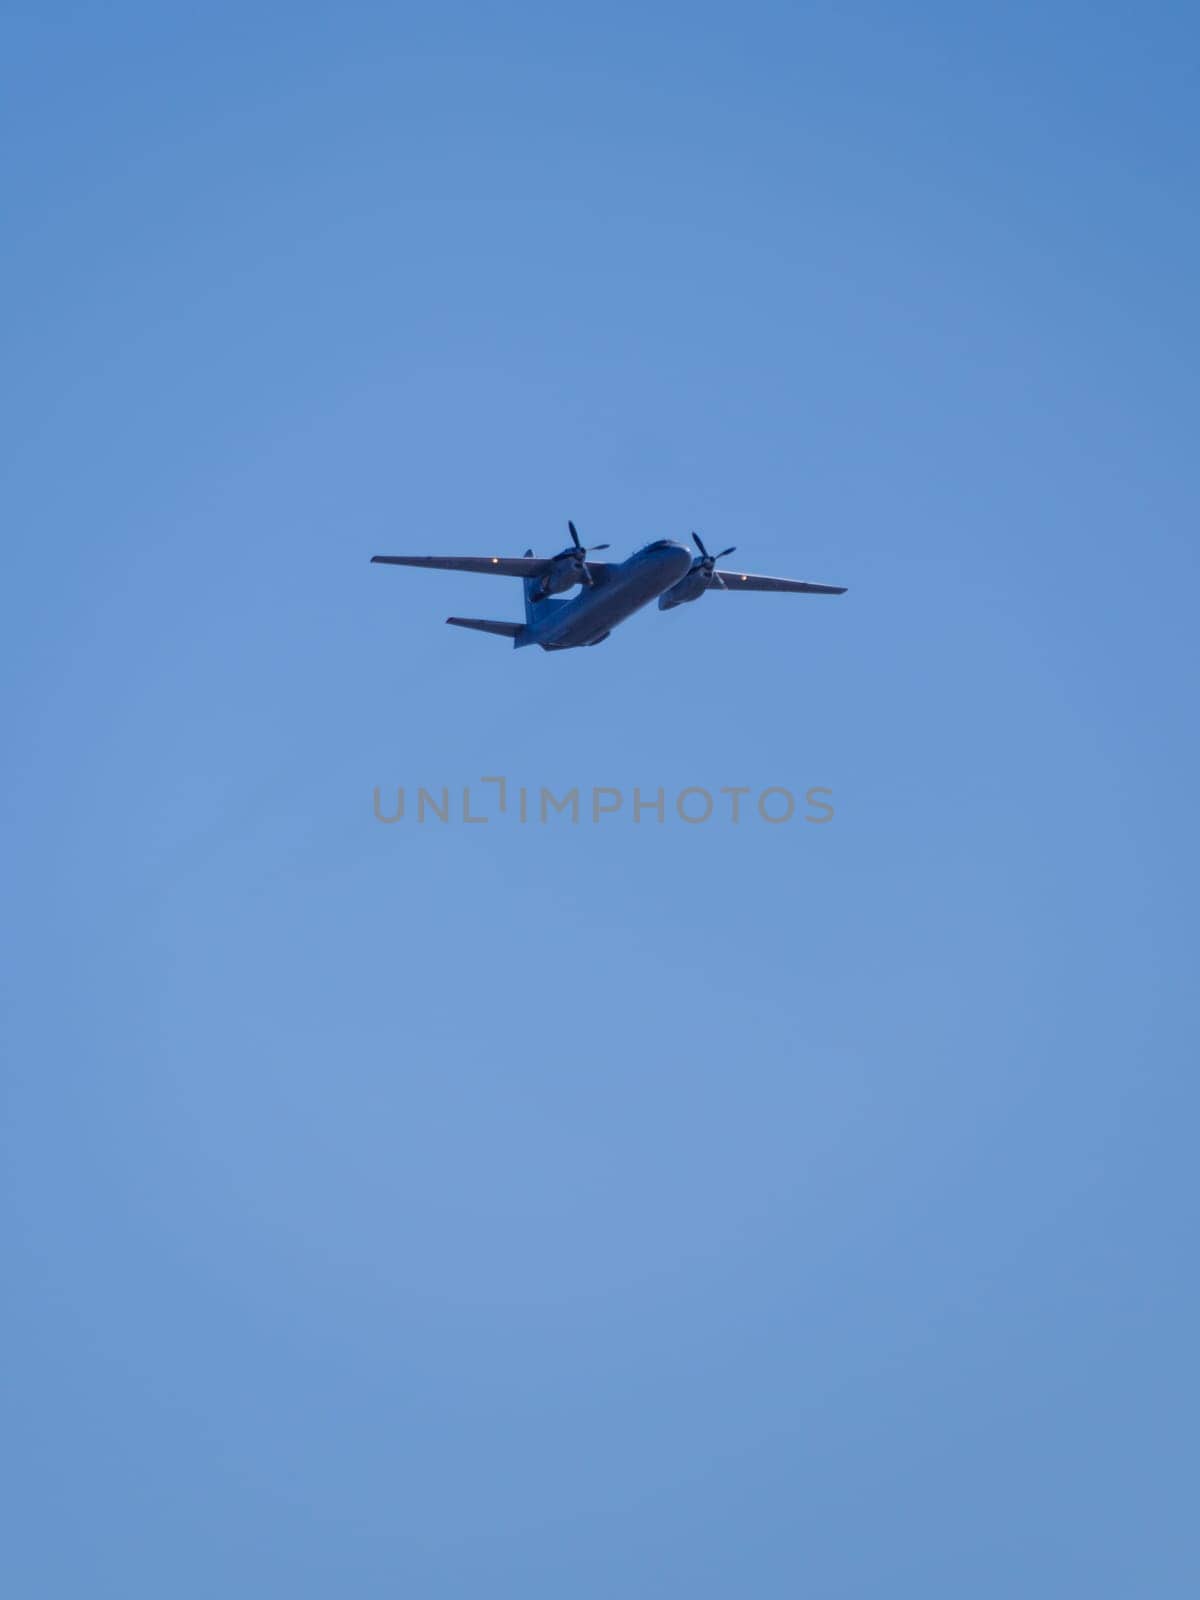 Russia, St. Petersburg - June 24, 2020: Russian military an-26 plane of the Russian Air Force in flight at the Victory Parade in World War II.